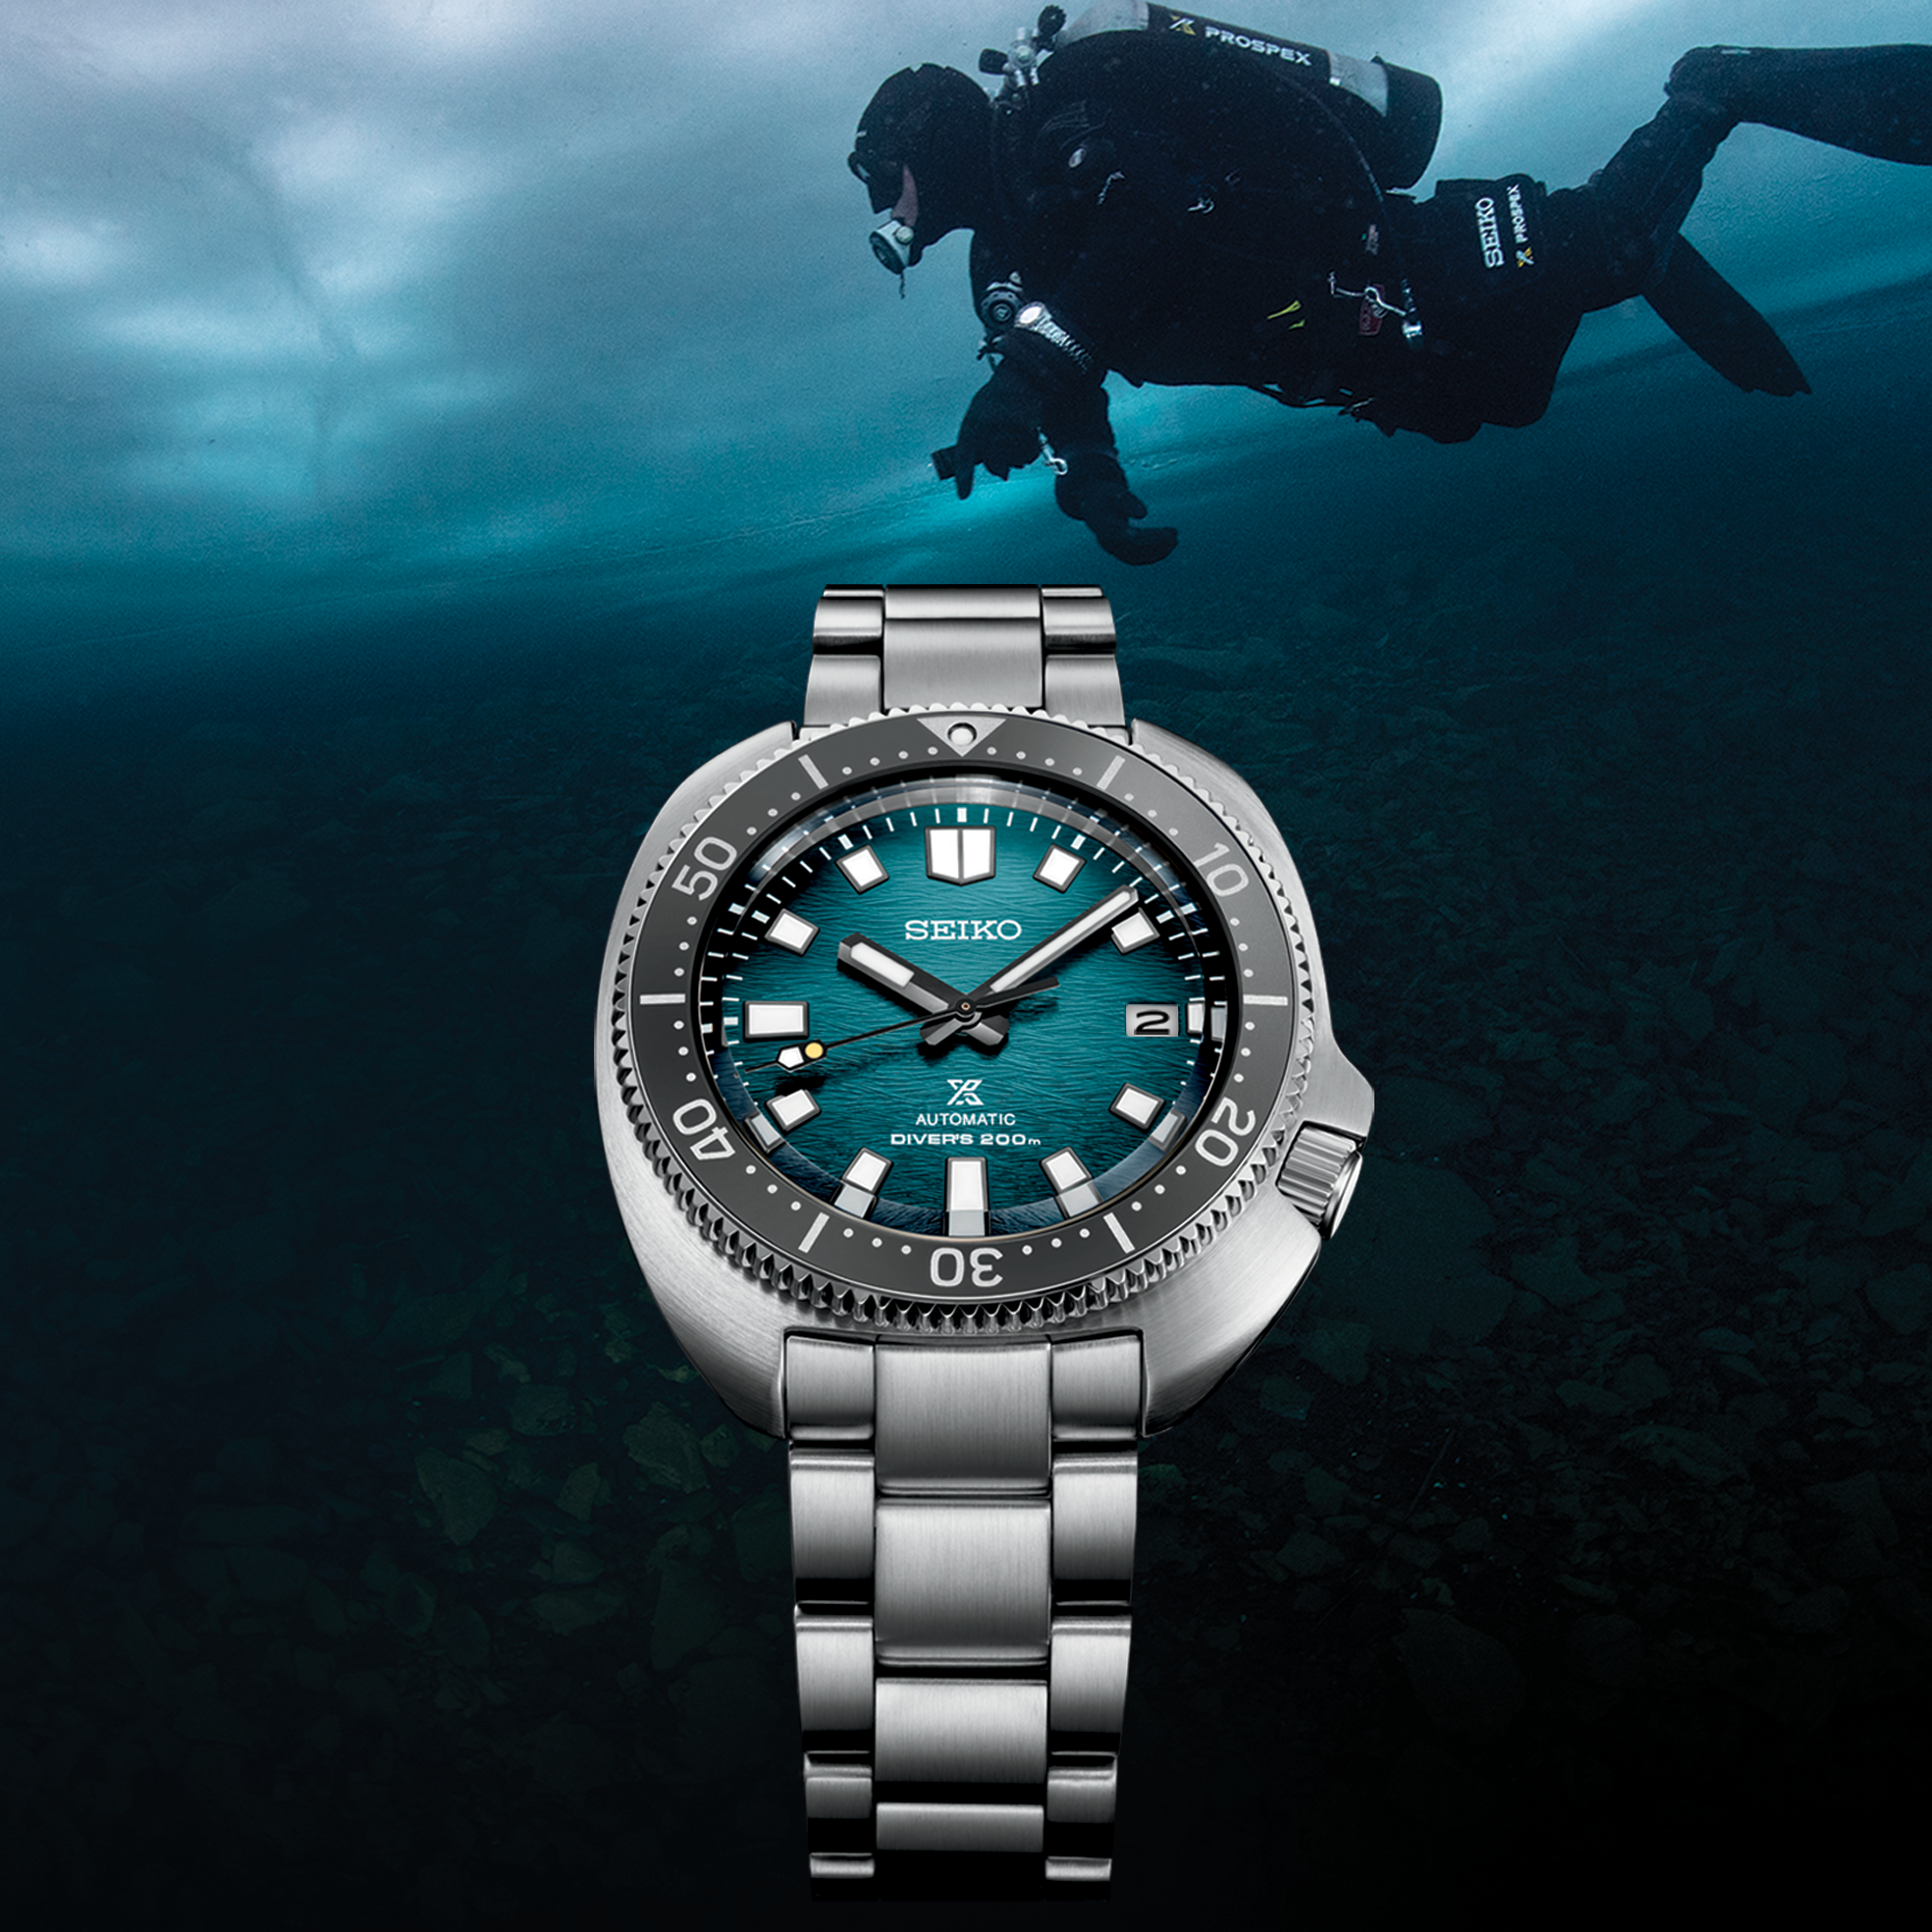 PROSPEX BUILT FOR THE ICE DIVER U.S. SPECIAL EDITION SPB265